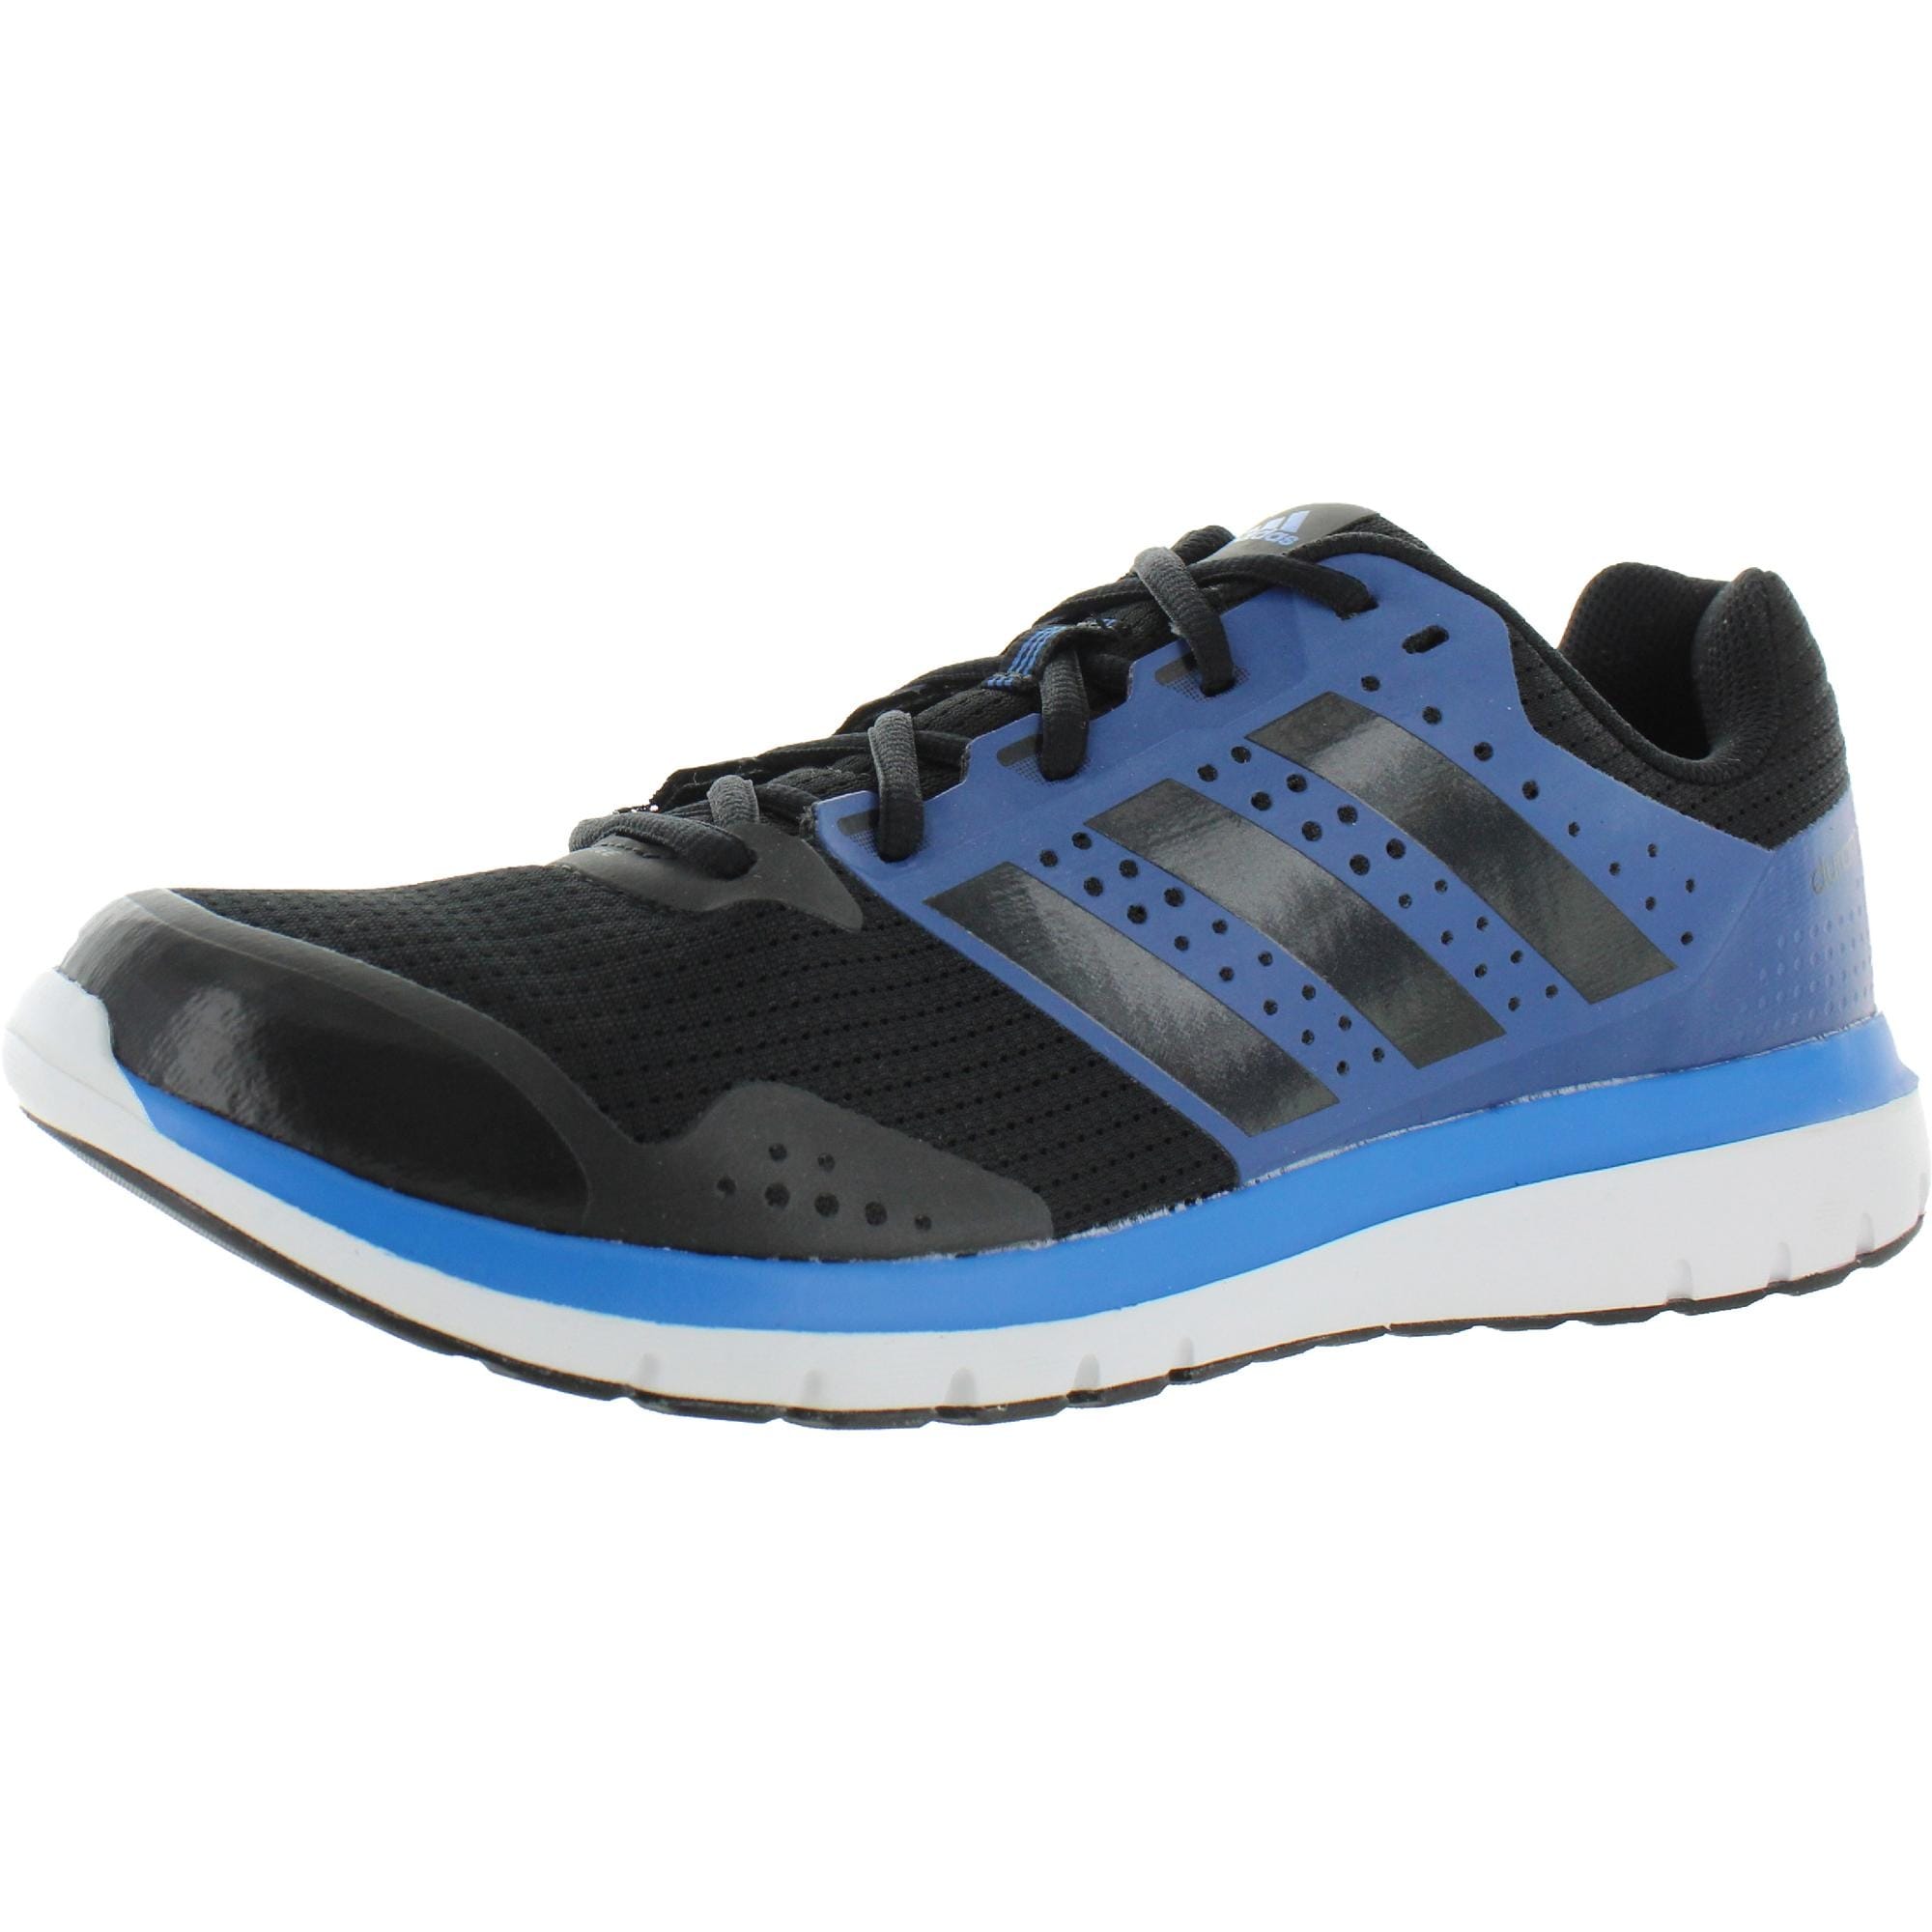 adidas supercloud running shoes